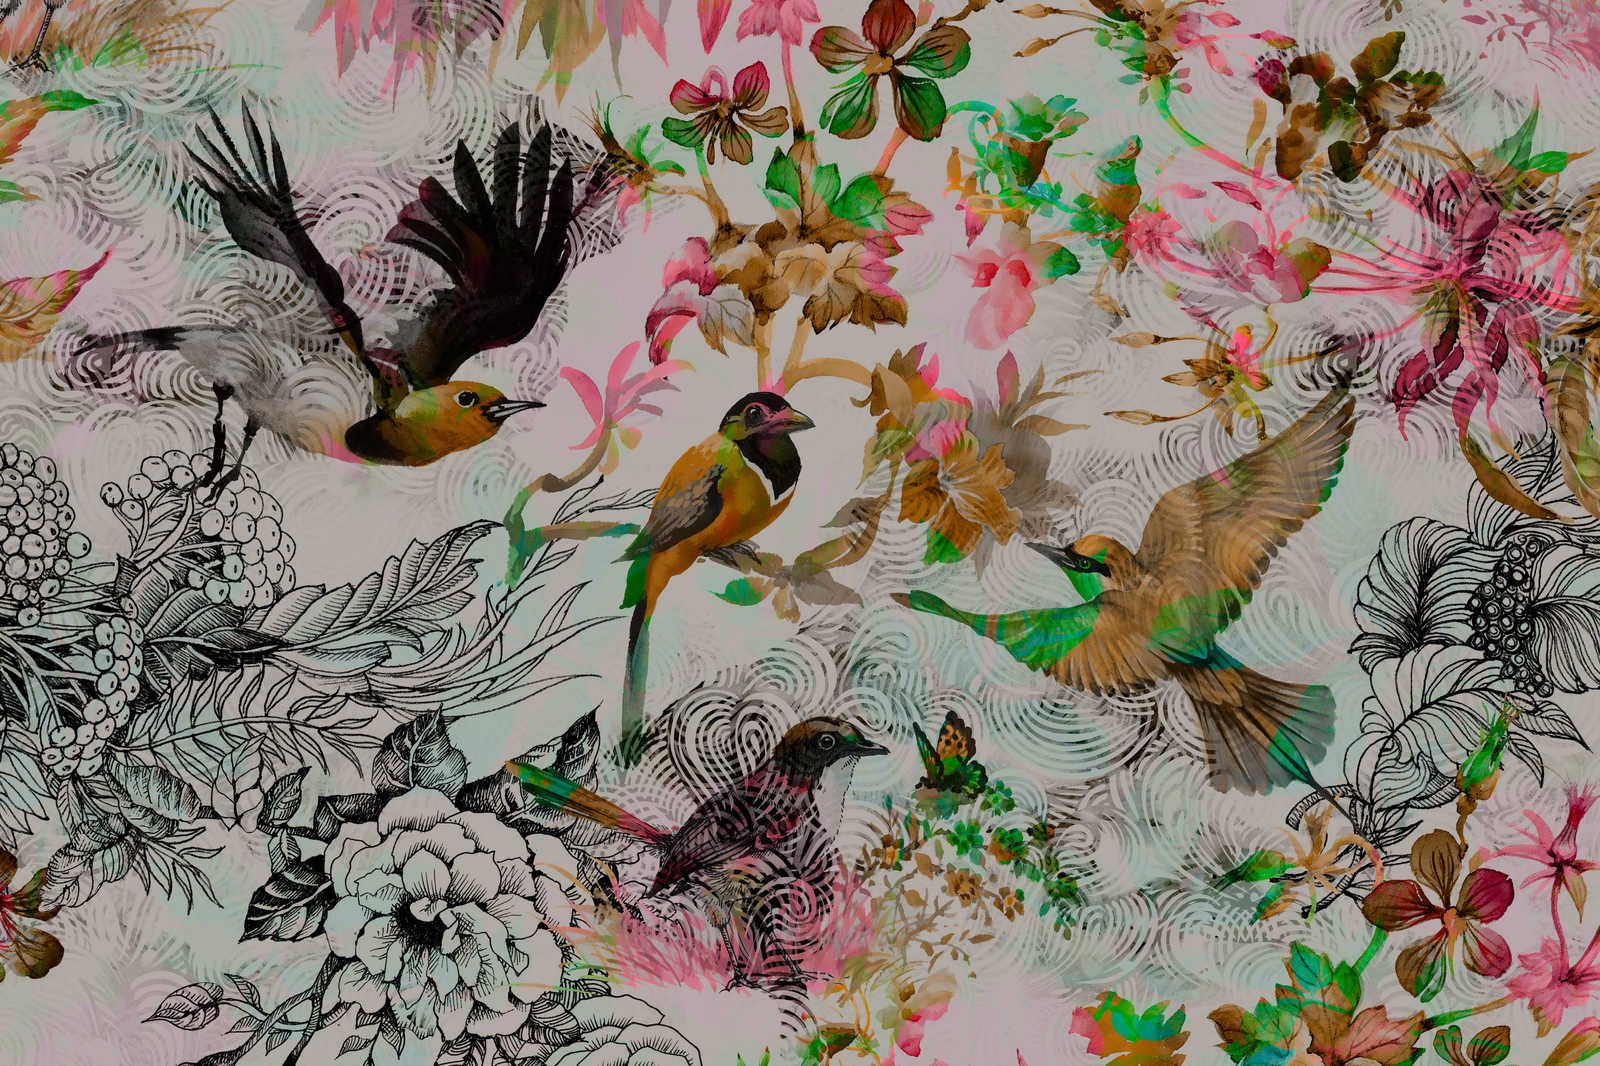             Canvas painting Birds & Flowers Collage Style - 1.20 m x 0.80 m
        